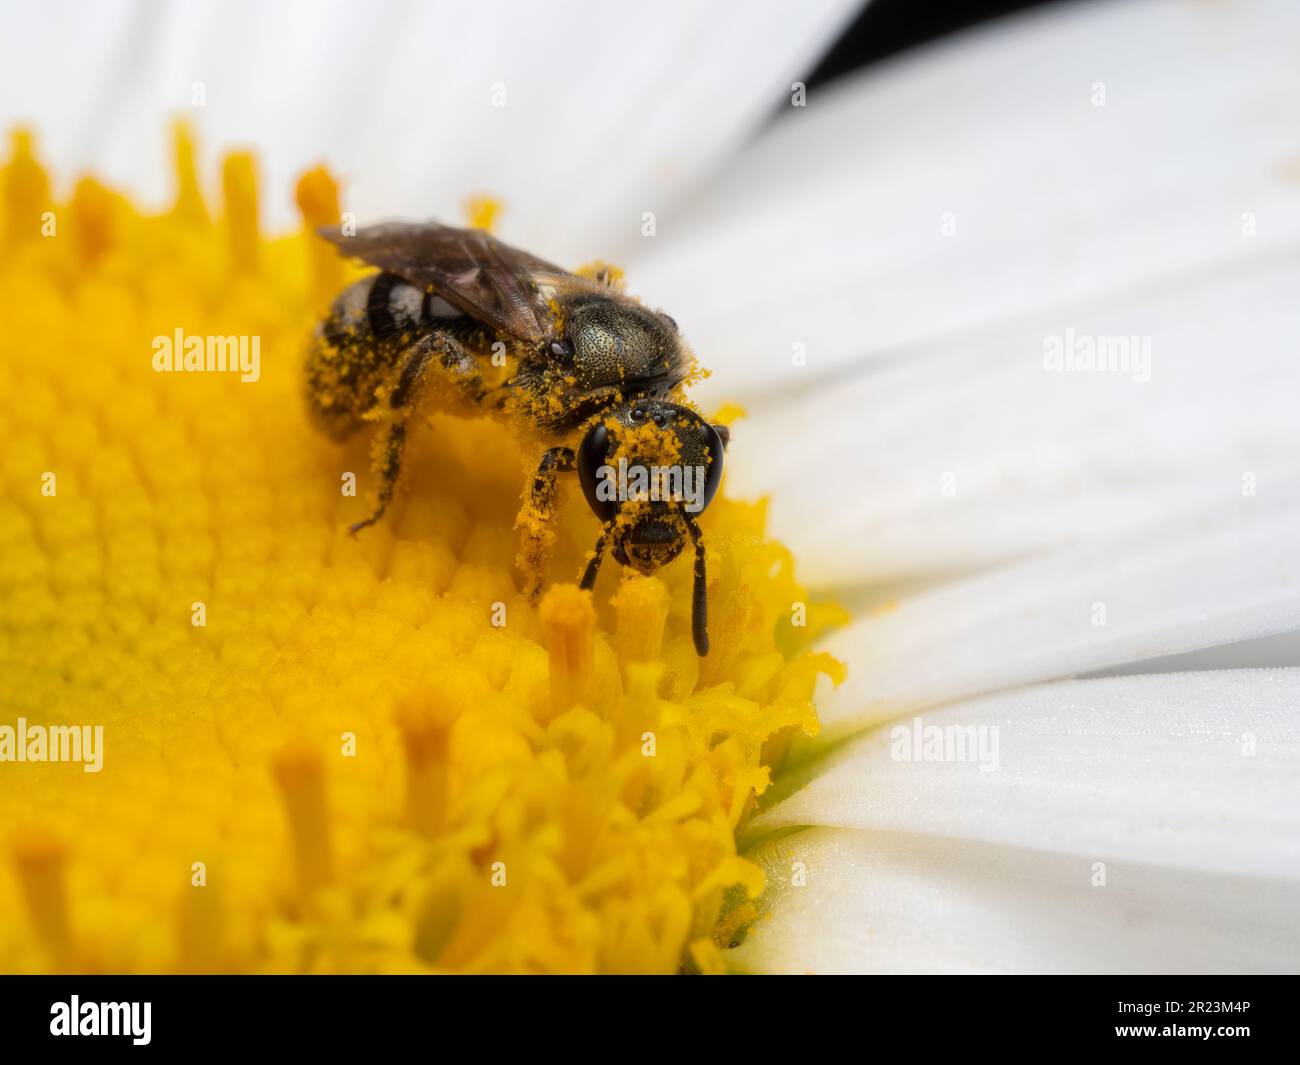 Close-up of a female sweat bee (Lasioglossum species) facing the camera while covered in yellow pollen on a daisy flower. Delta, British Columbia, Can Stock Photo